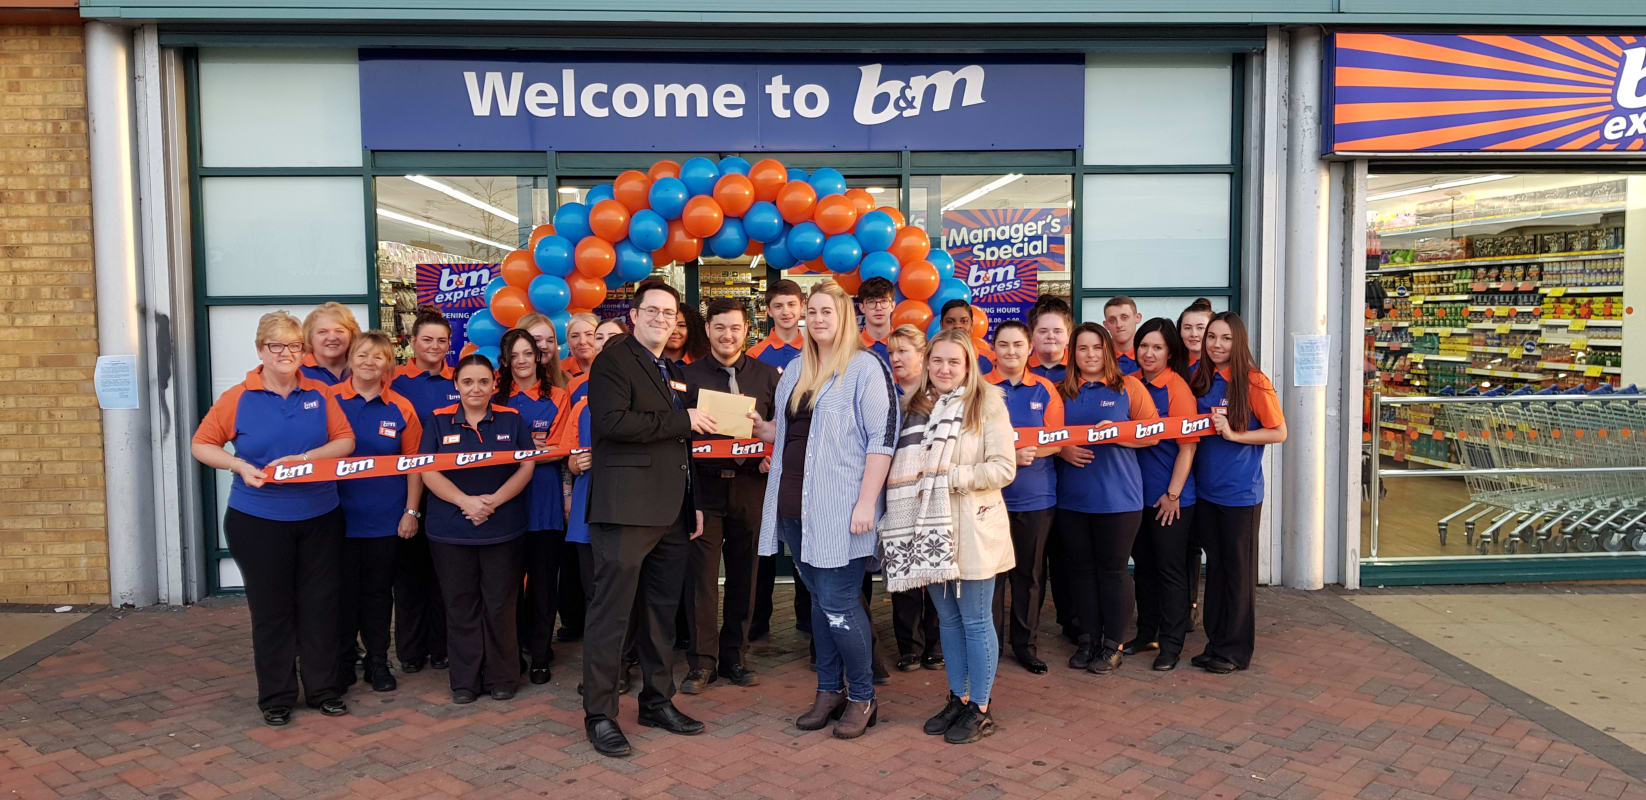 Paula from local charity Speke Children's Environment Committee was invited as B&M's VIP guest at the opening of its newest store to open in Speke, Liverpool. Paula received £250 worth of B&M vouchers on behalf of the charity, as a thank you for the hard